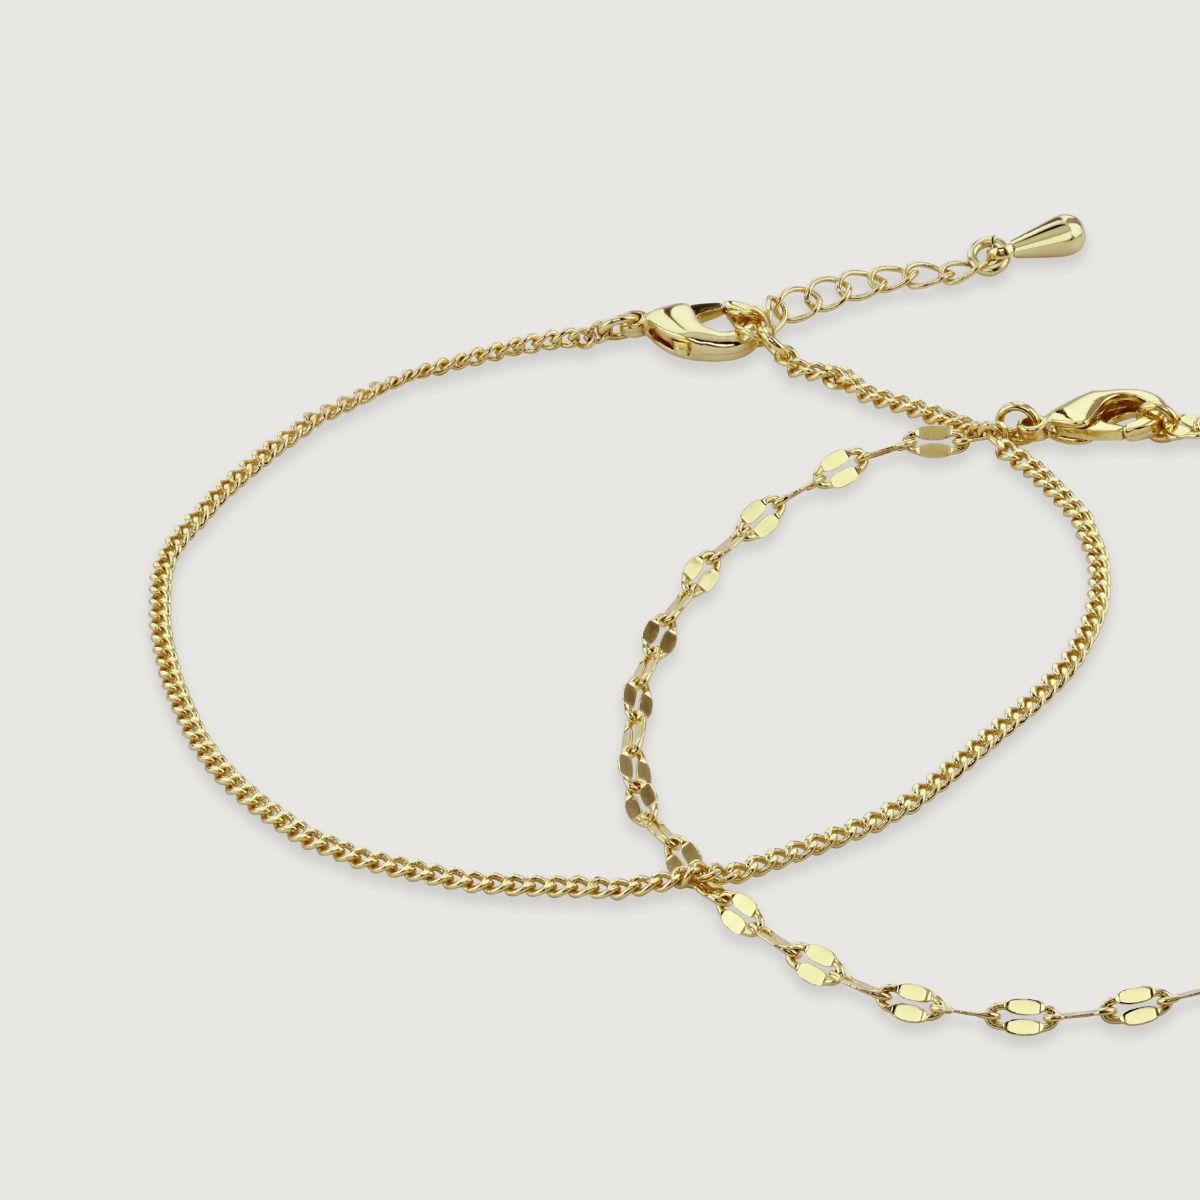 Discover the perfect balance of elegance and simplicity with this Set of Two Gold Chain Bracelets. One showcases a chic flat double chain, adding a contemporary edge, while the other showcases a classic and understated plain chain. Wear them individually 